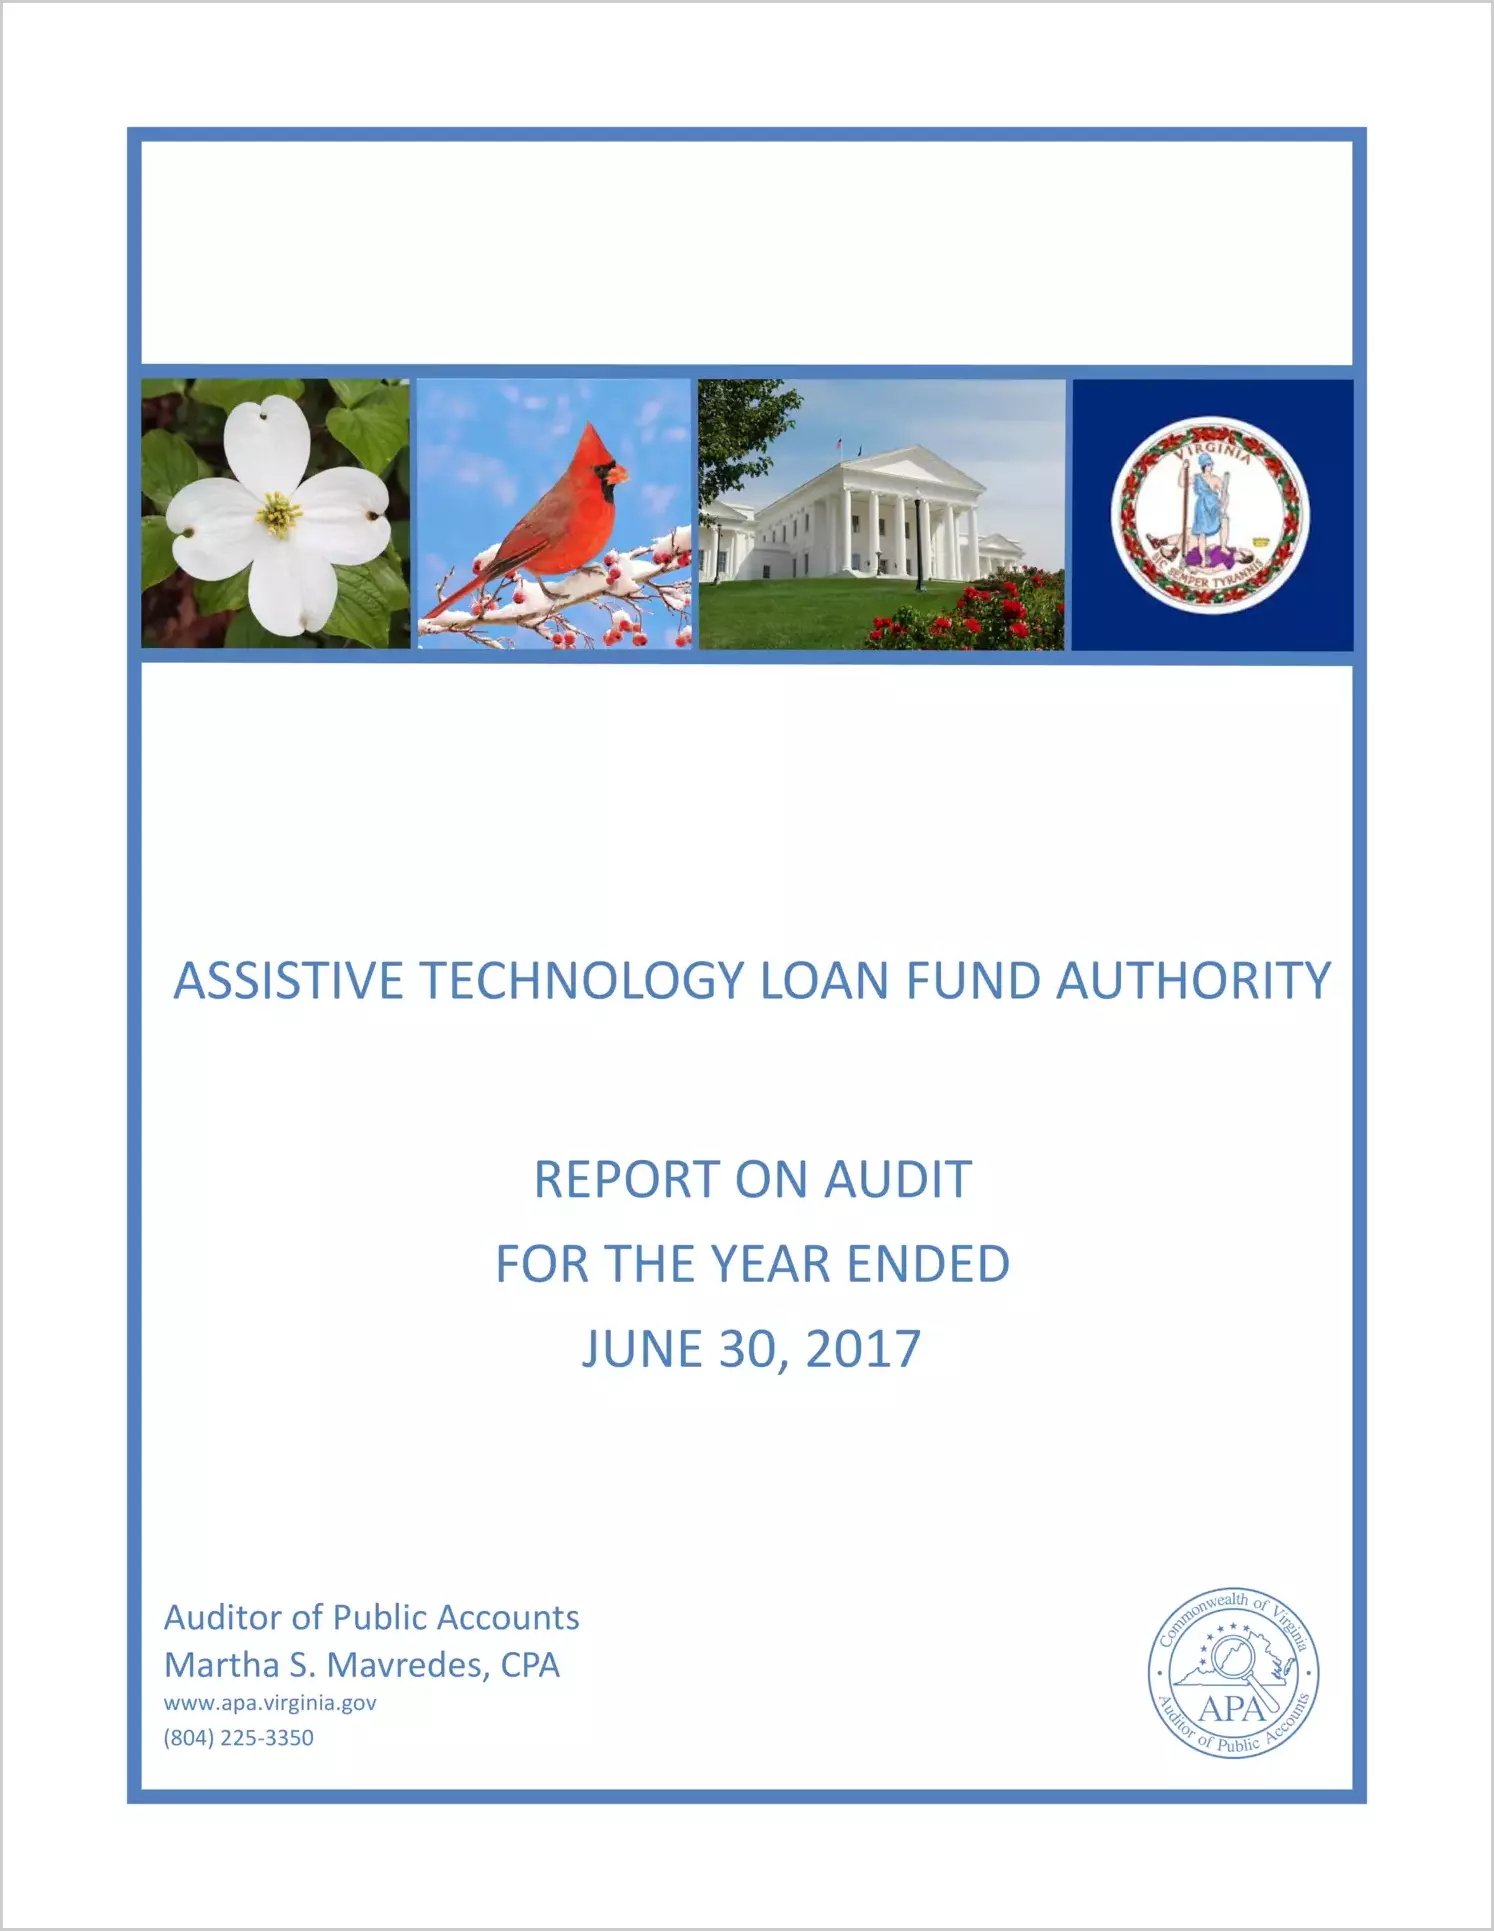 Assistive Techonolgy Loan Fund Authority for the year ended June 30, 2017